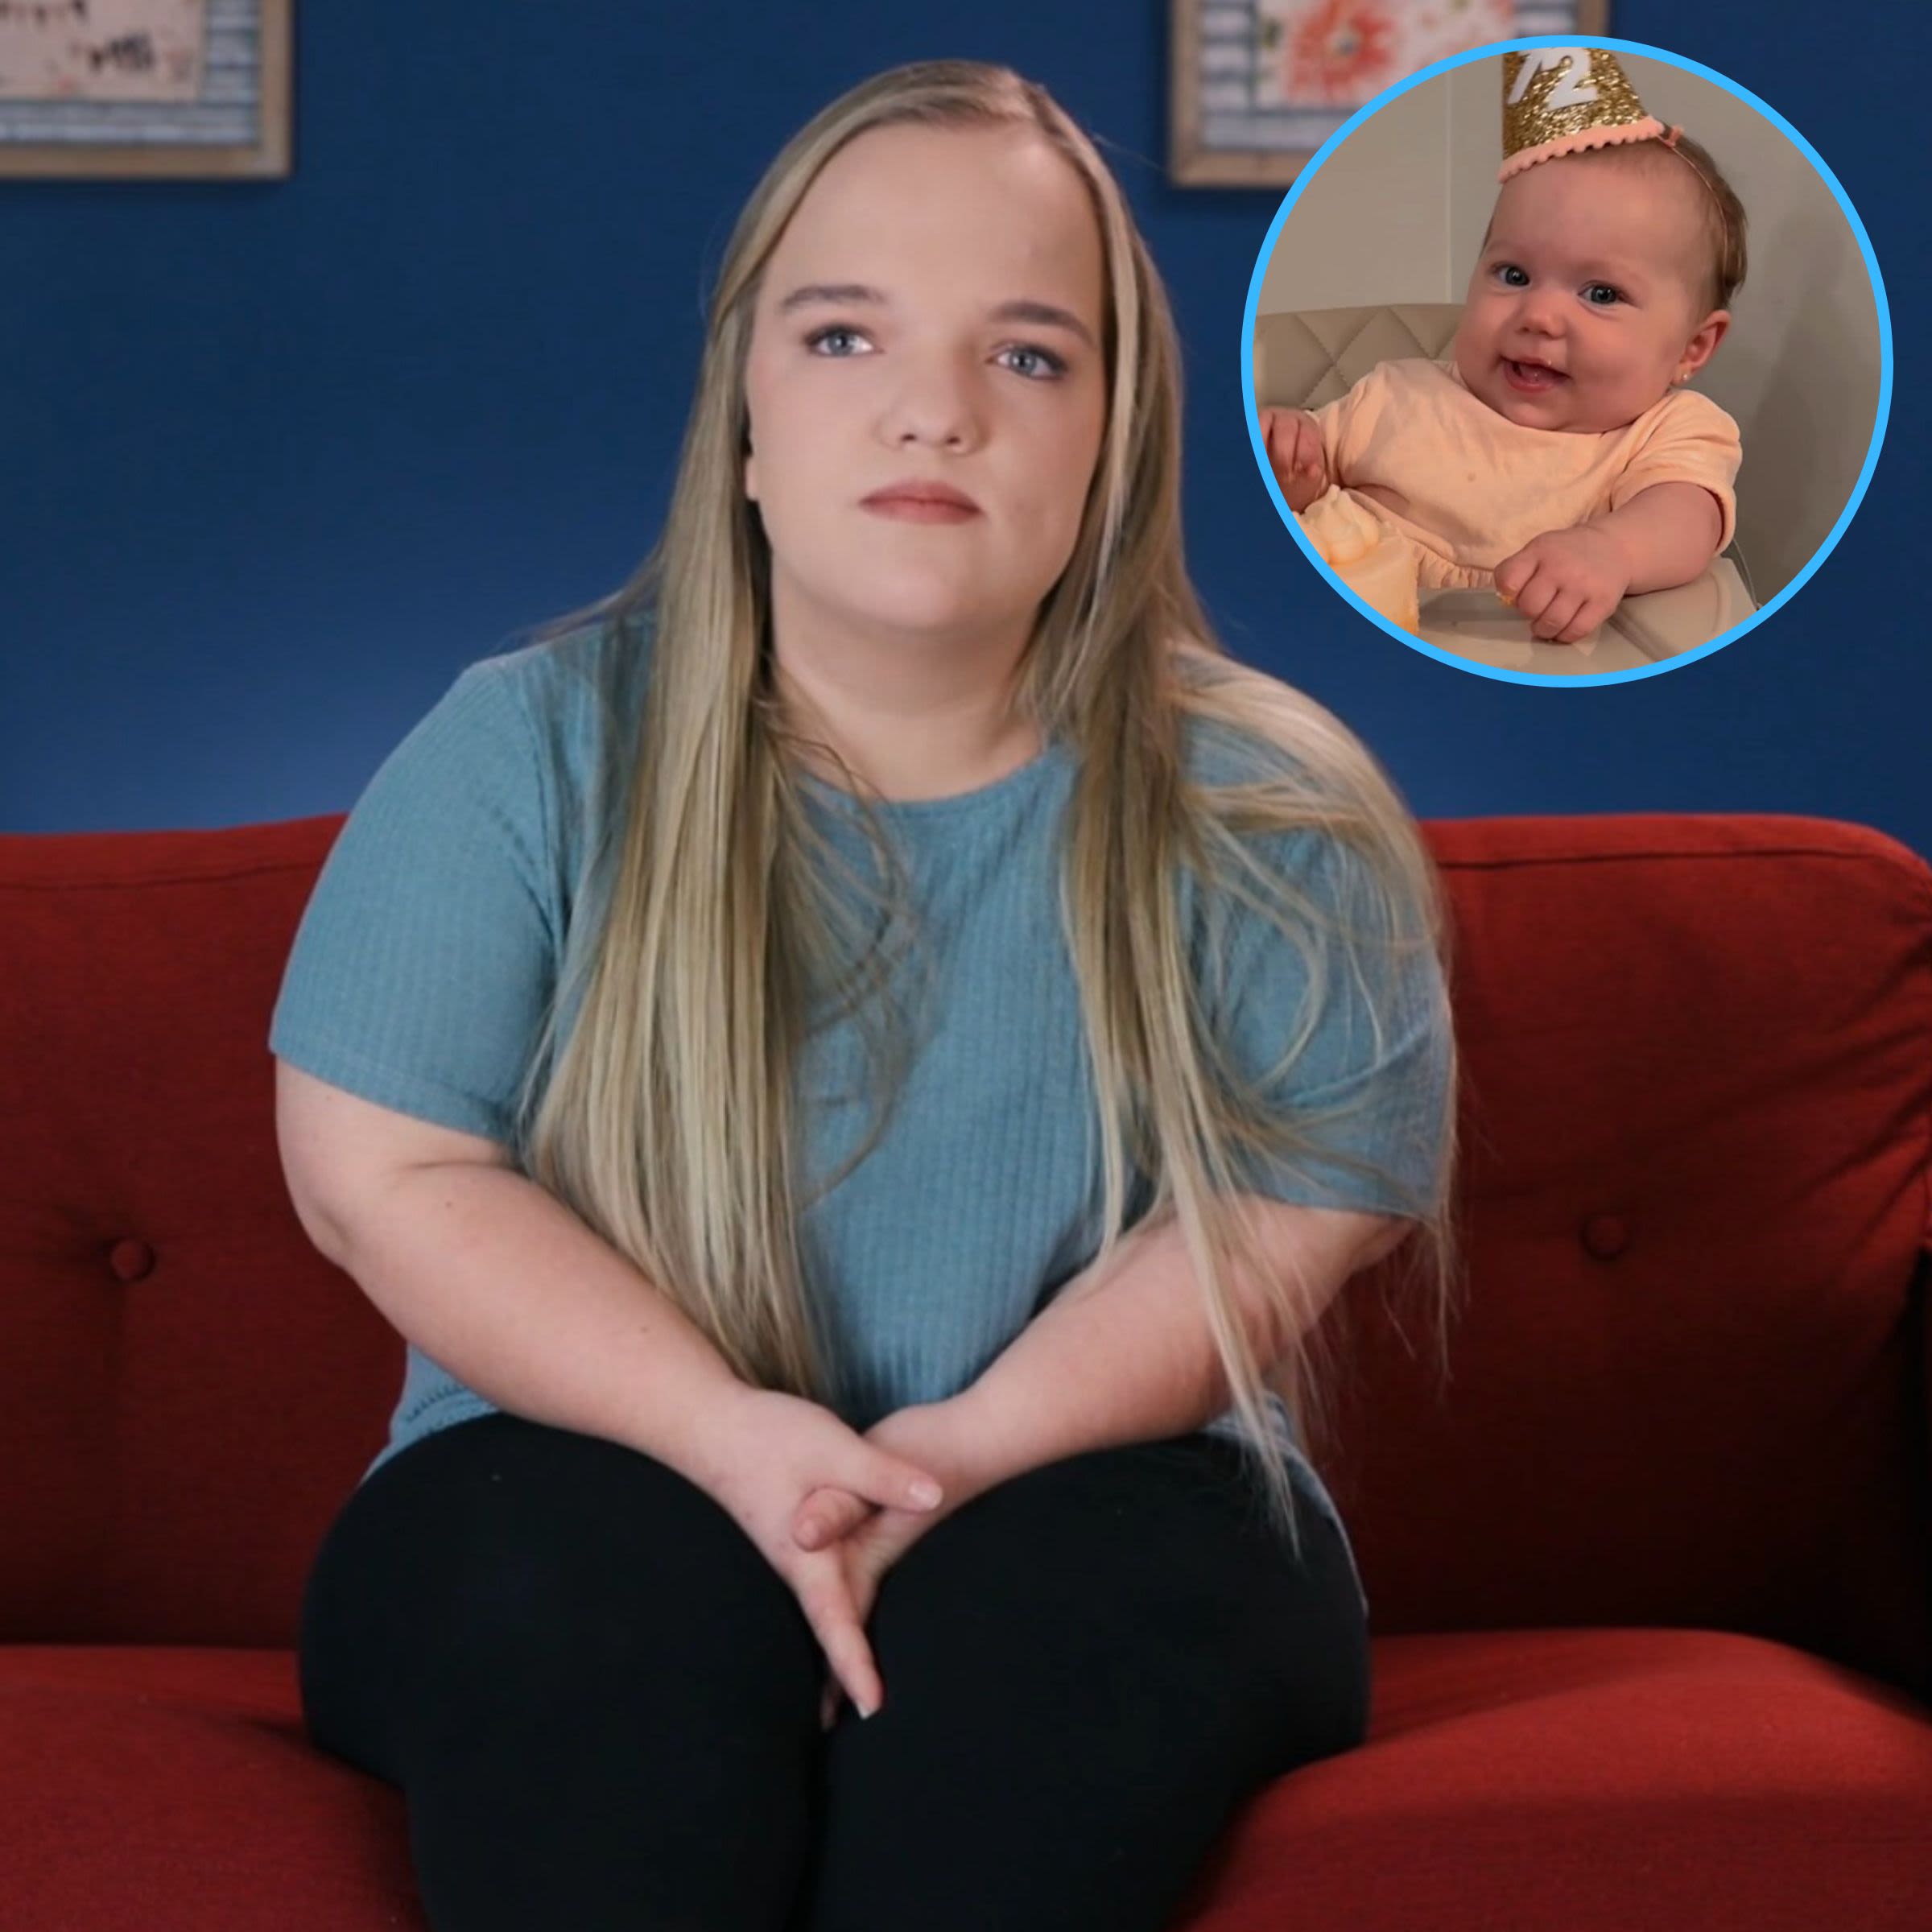 Is ‘7 Little Johnston’ Star Liz Johnston and Brice Bolden’s Baby a Little Person?